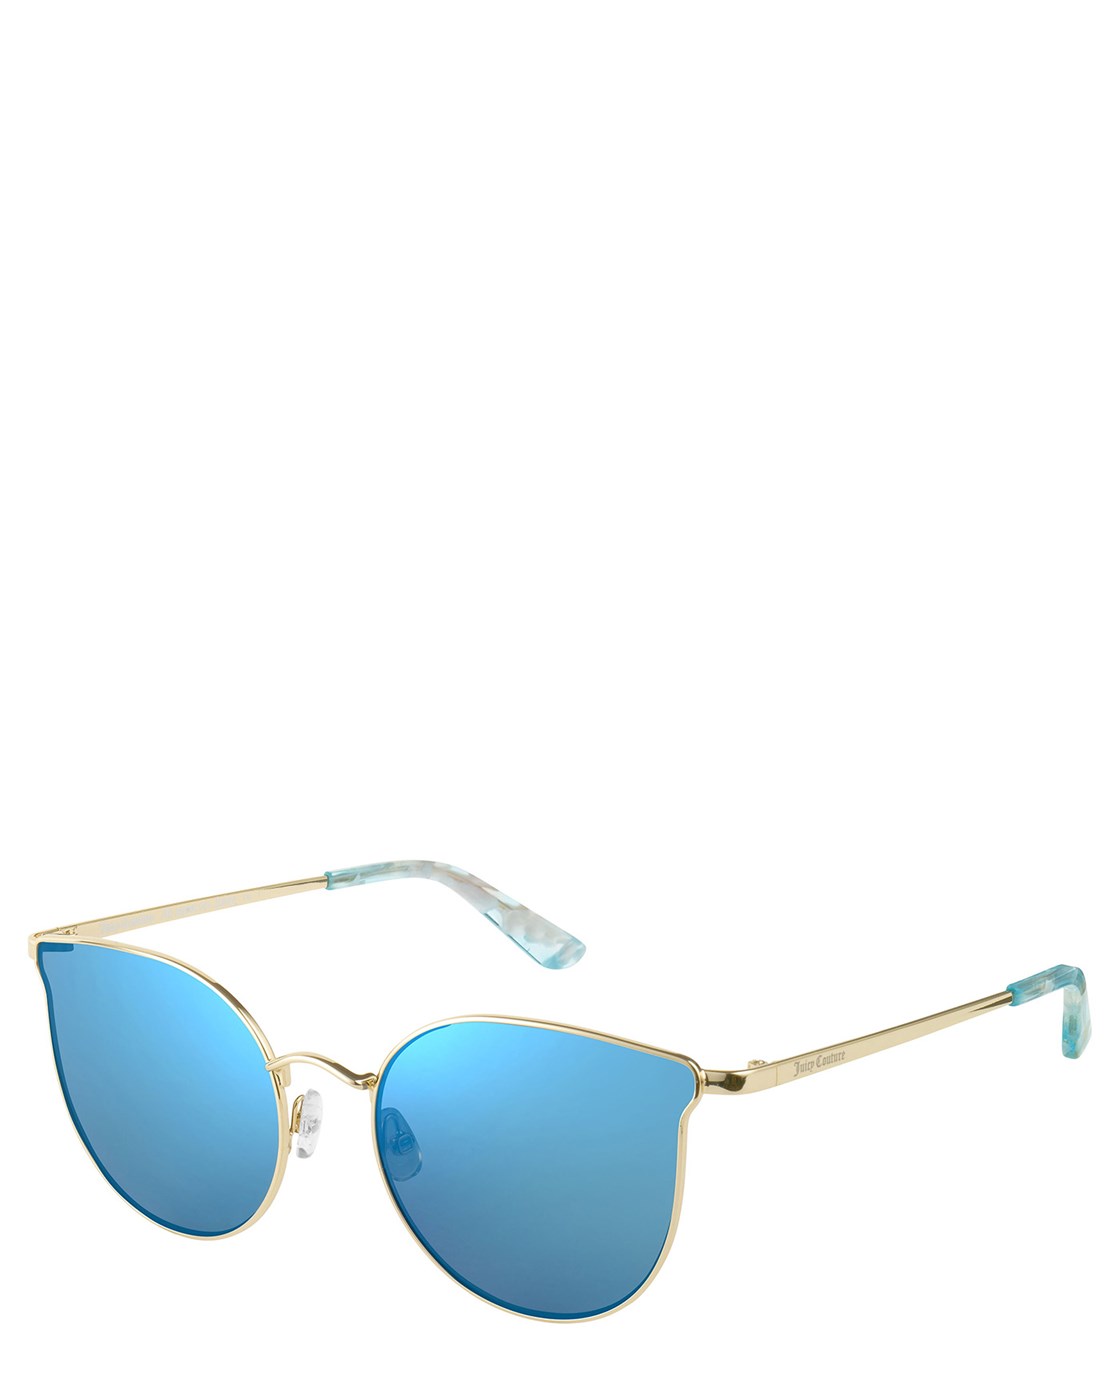 Juicy Couture Wire Frame Sunglasses